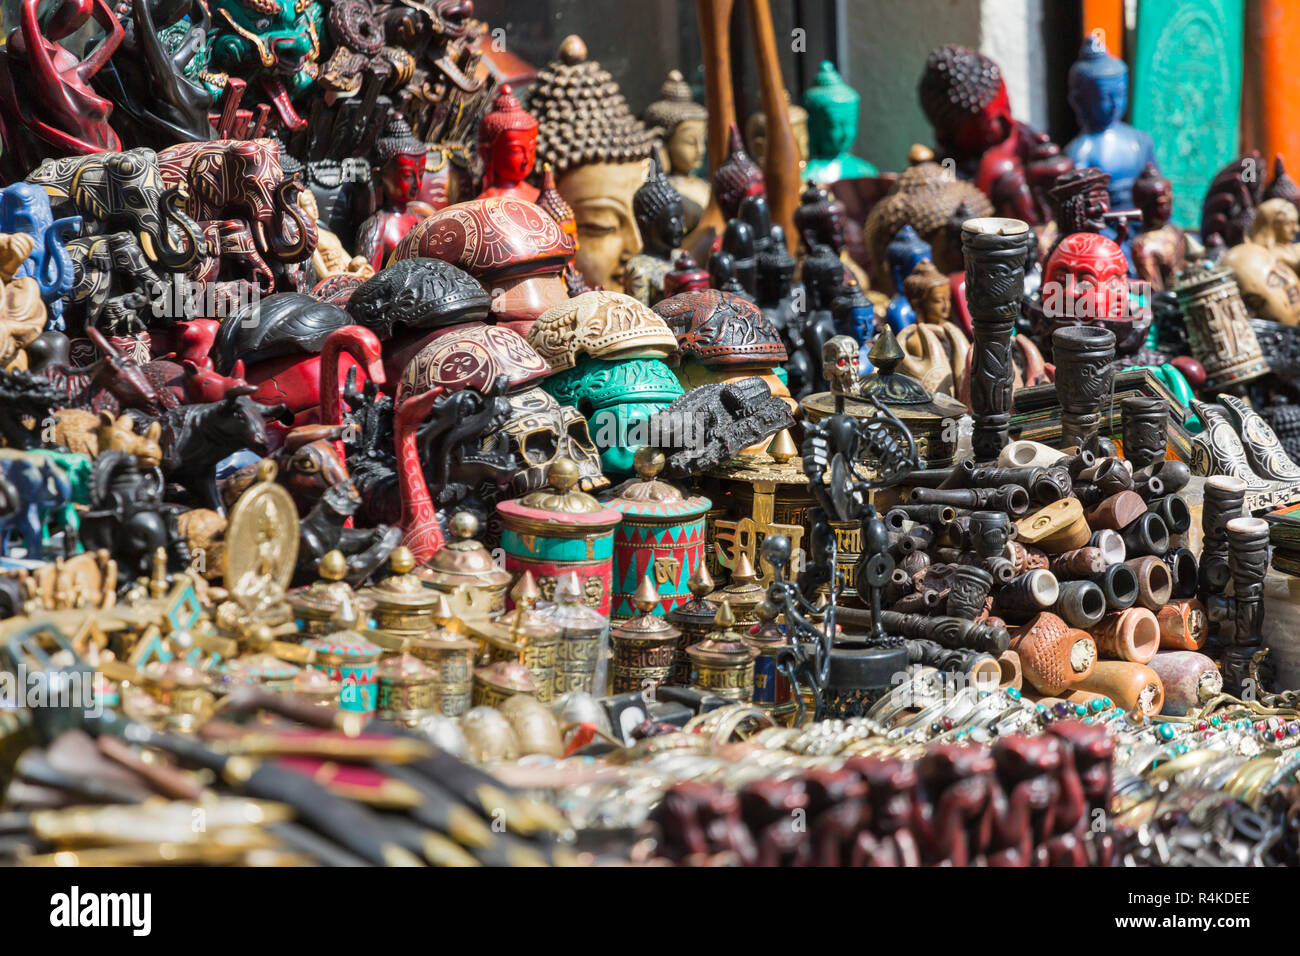 Masks, dolls and souvenirs in street shop at Durbar Square in Kathmandu, Nepal. Stock Photo